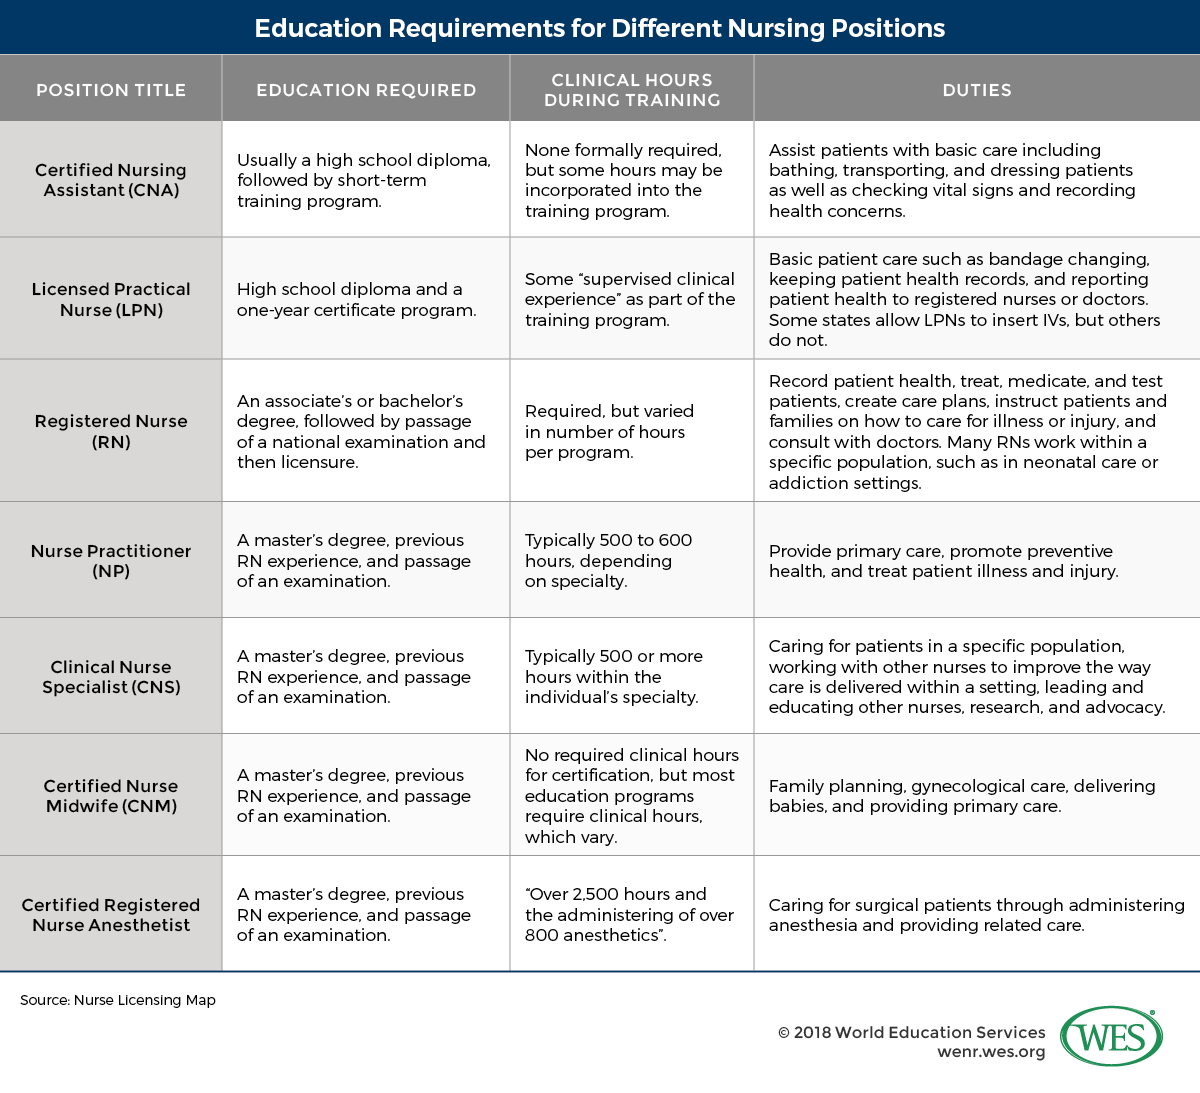 A table describing education requirements for different nursing positions in the U.S. 